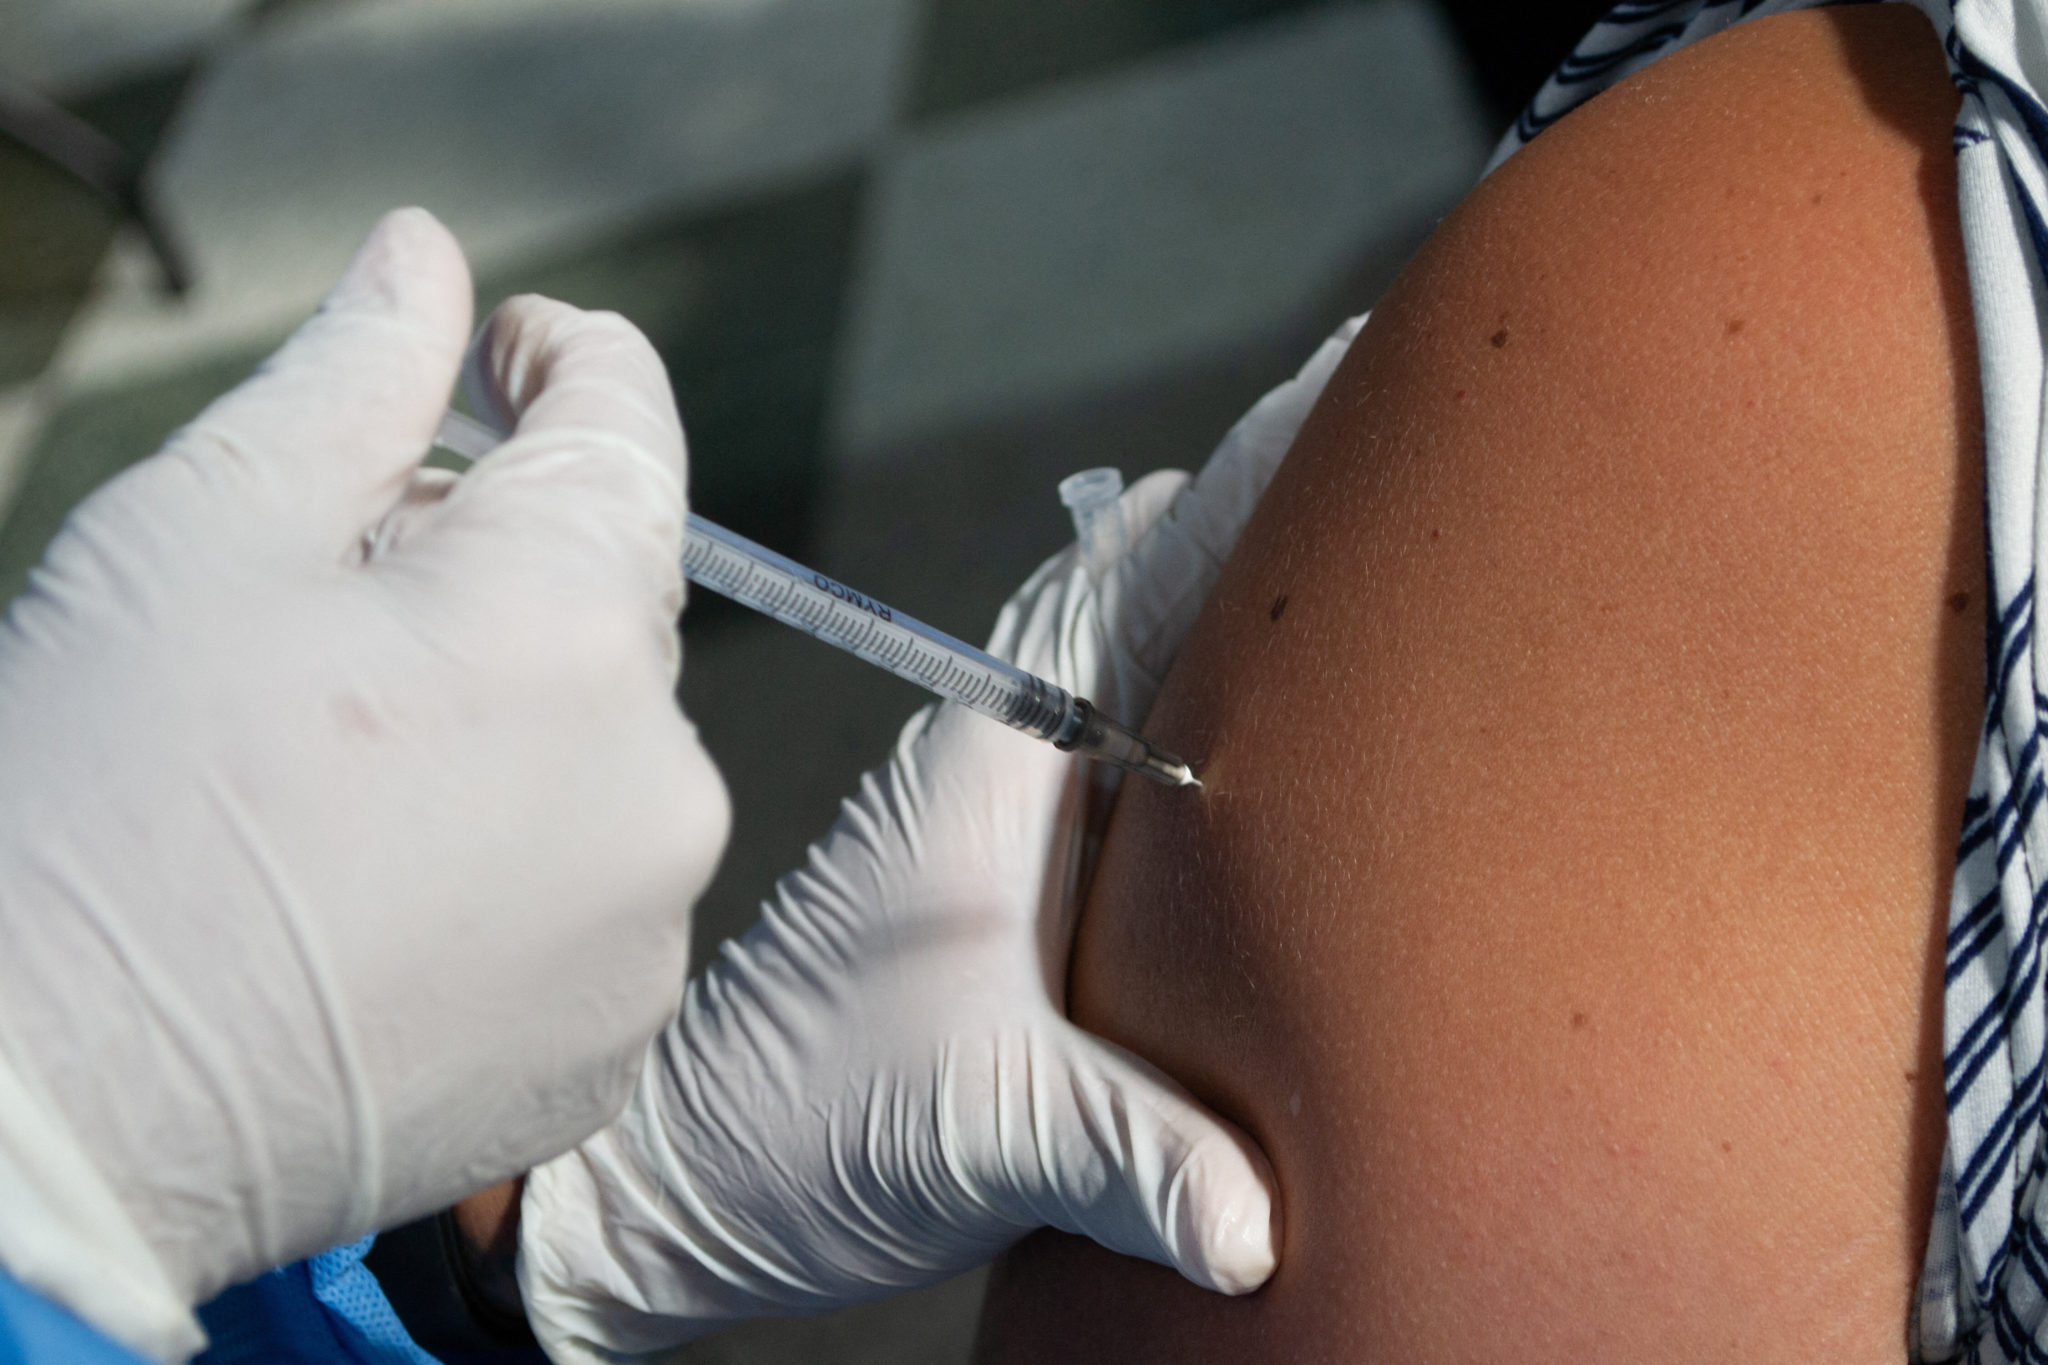 A women gets a dose of the Moderna COVID-19 vaccine in Bogota, Colombia in this file photo